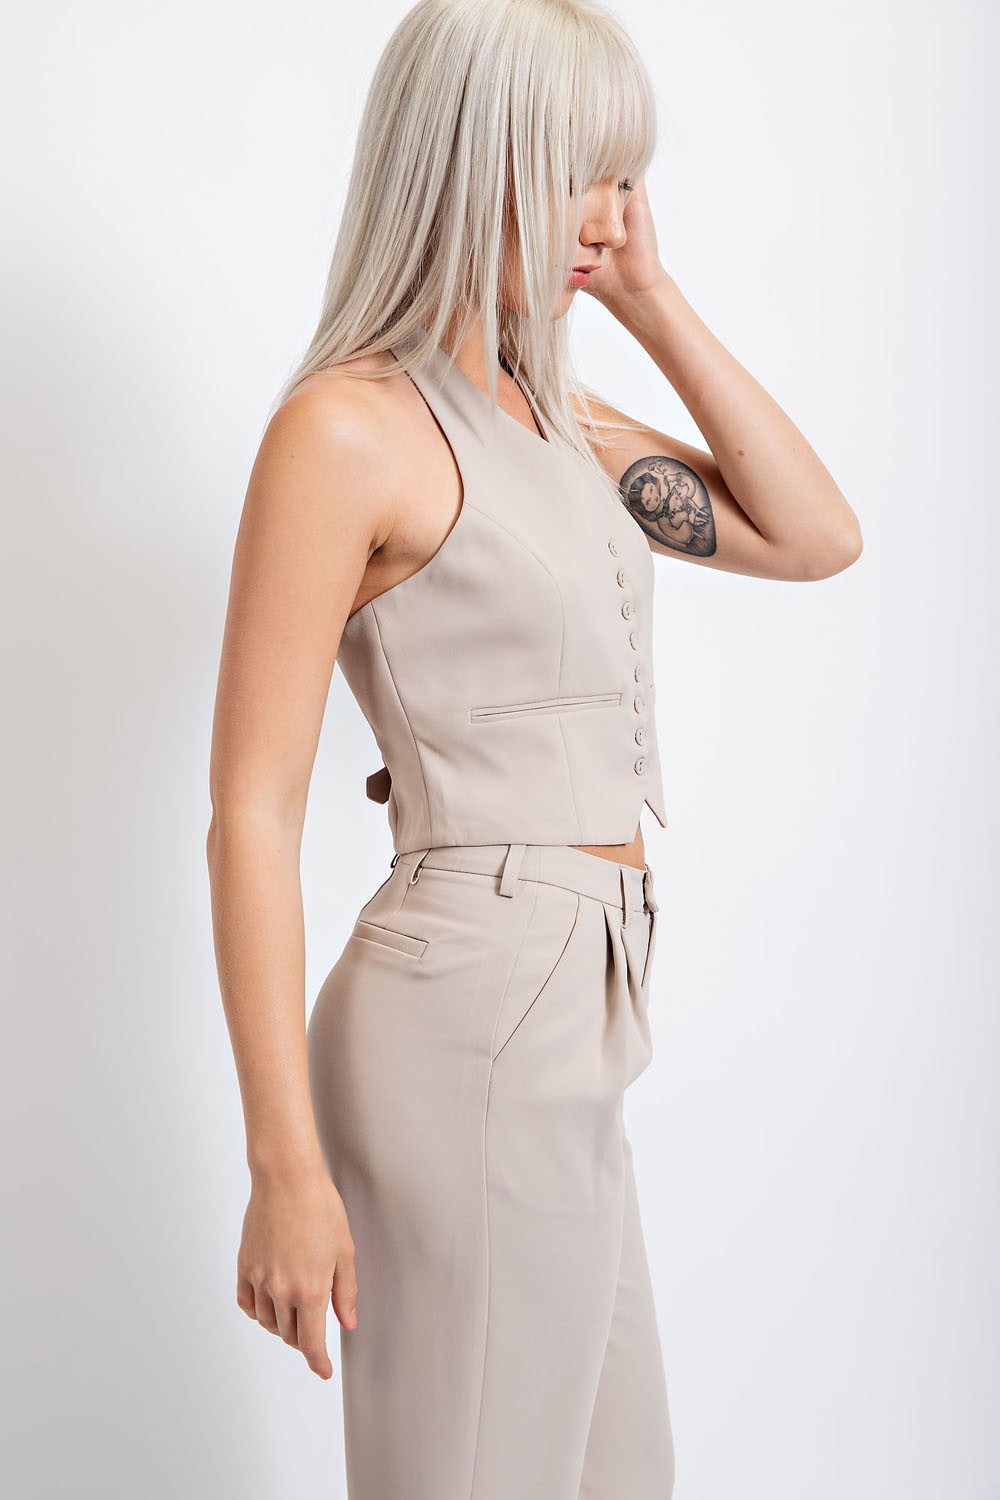 The Raleigh Vest + Pant Set - Sold Separately